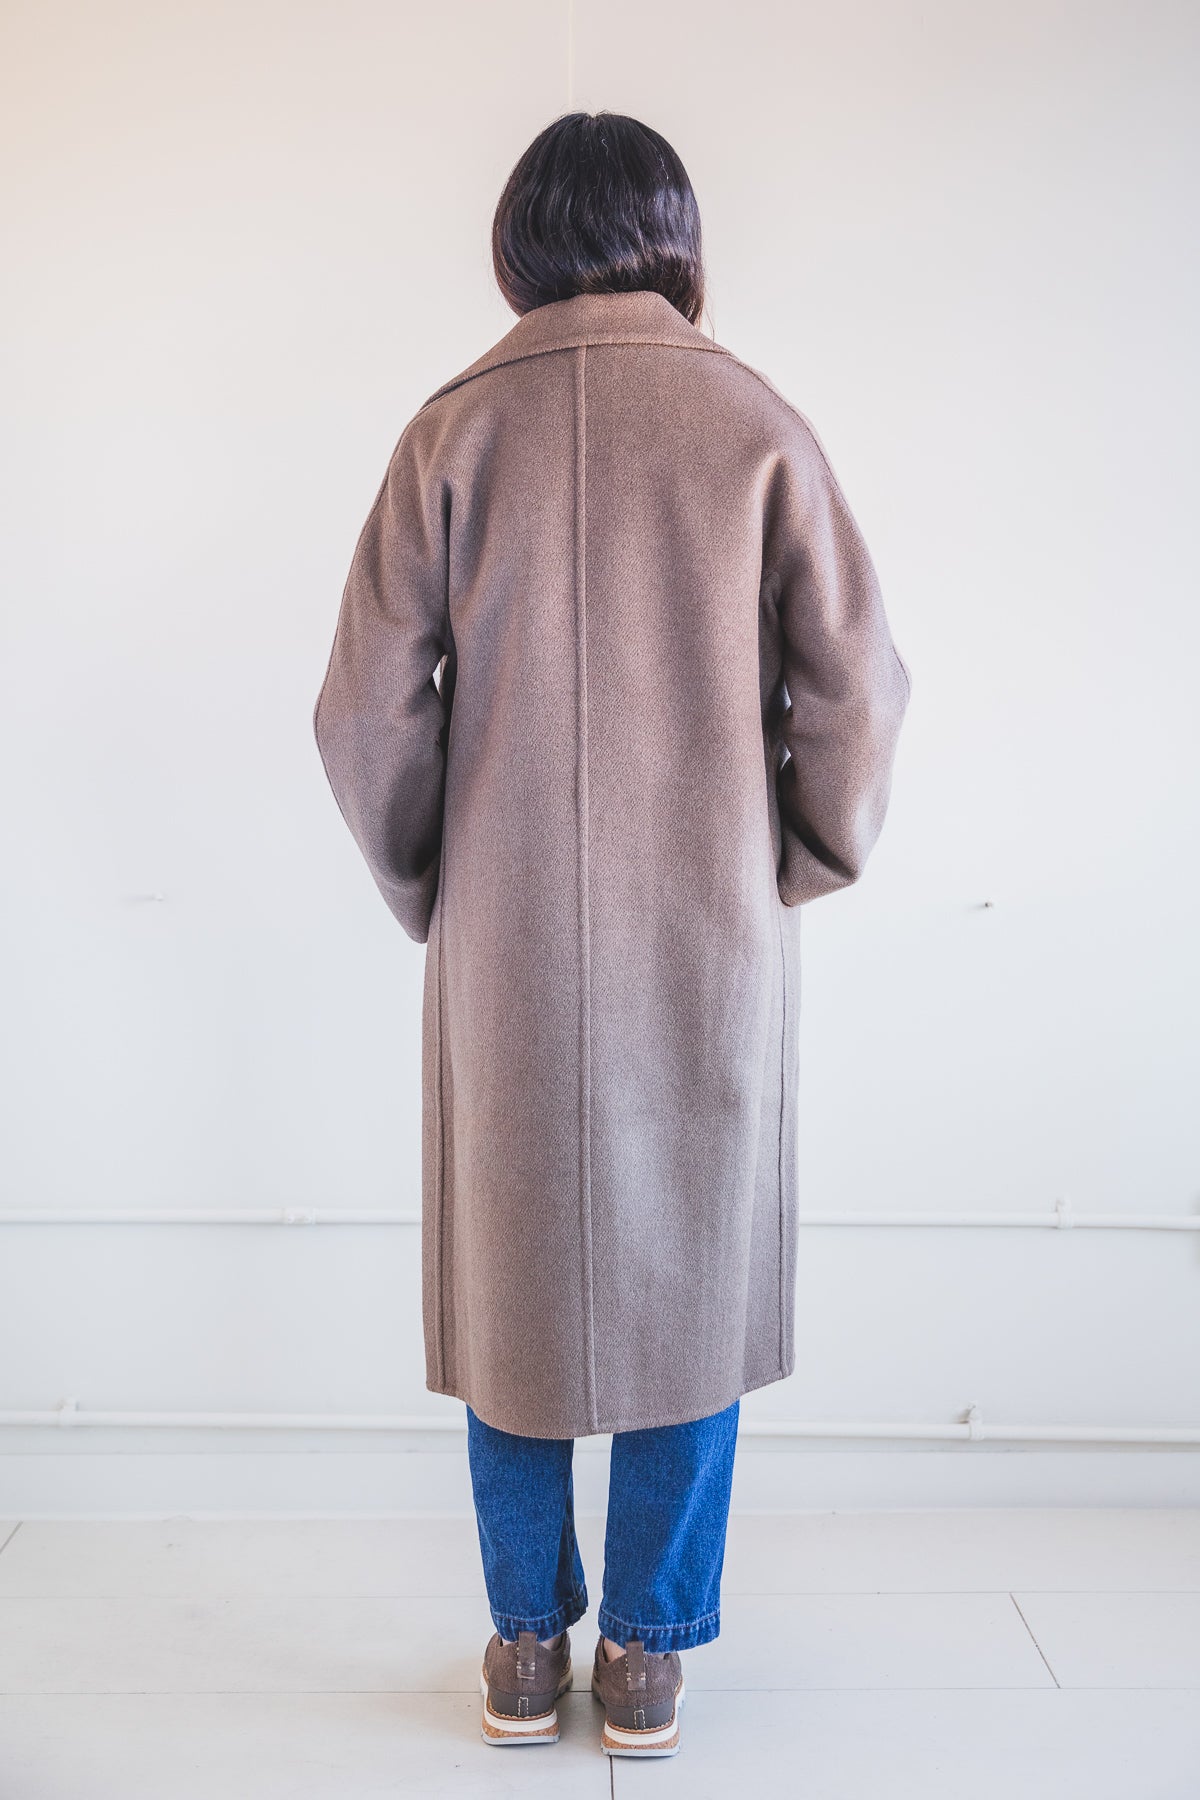 DOUBLE FACE LONG COAT IN UNDYED BROWN YAK WOOL